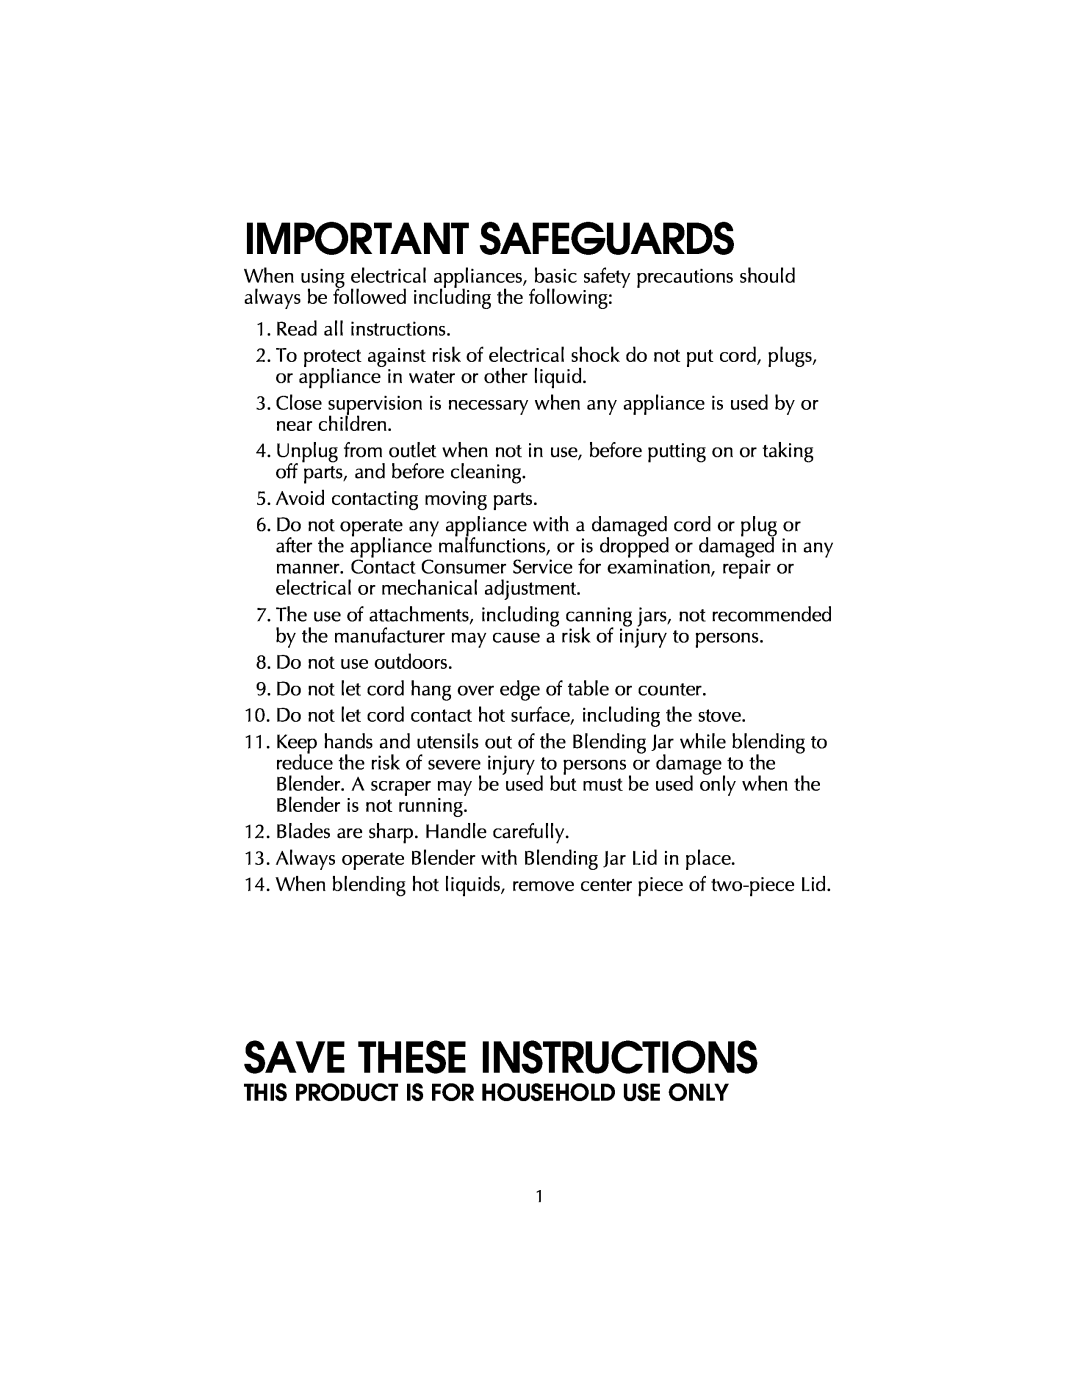 Salton BL22 owner manual Important Safeguards, Save These Instructions, This Product Is For Household Use Only 